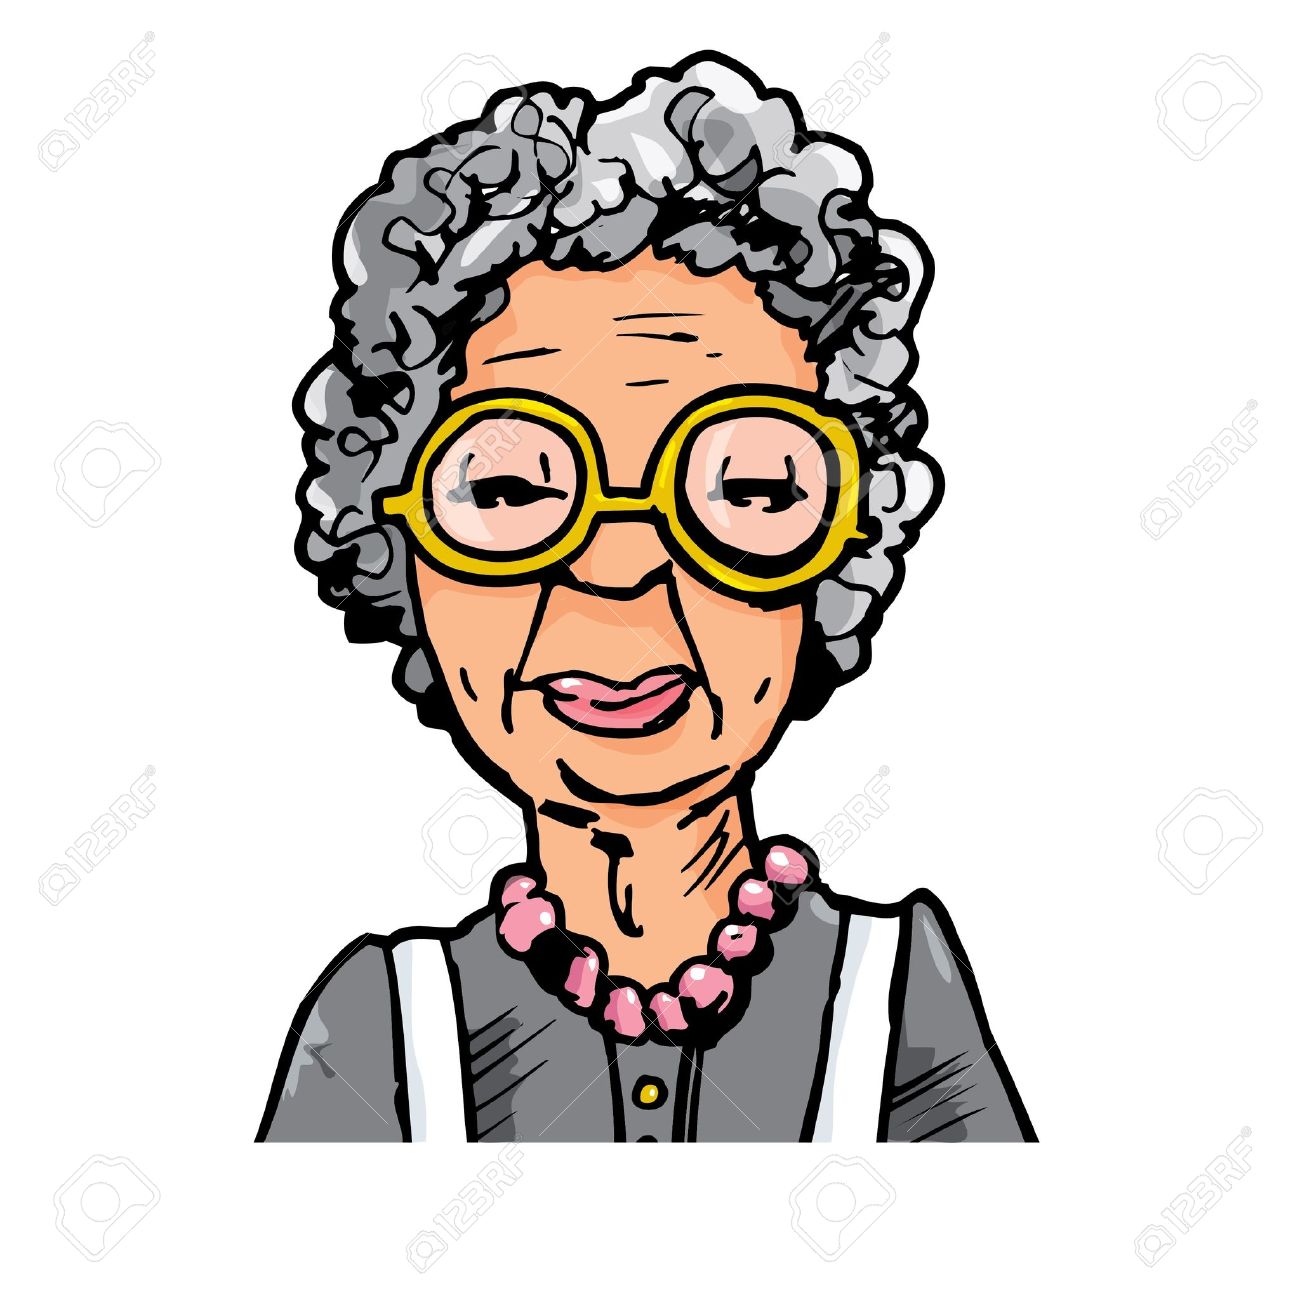 Old woman clipart.